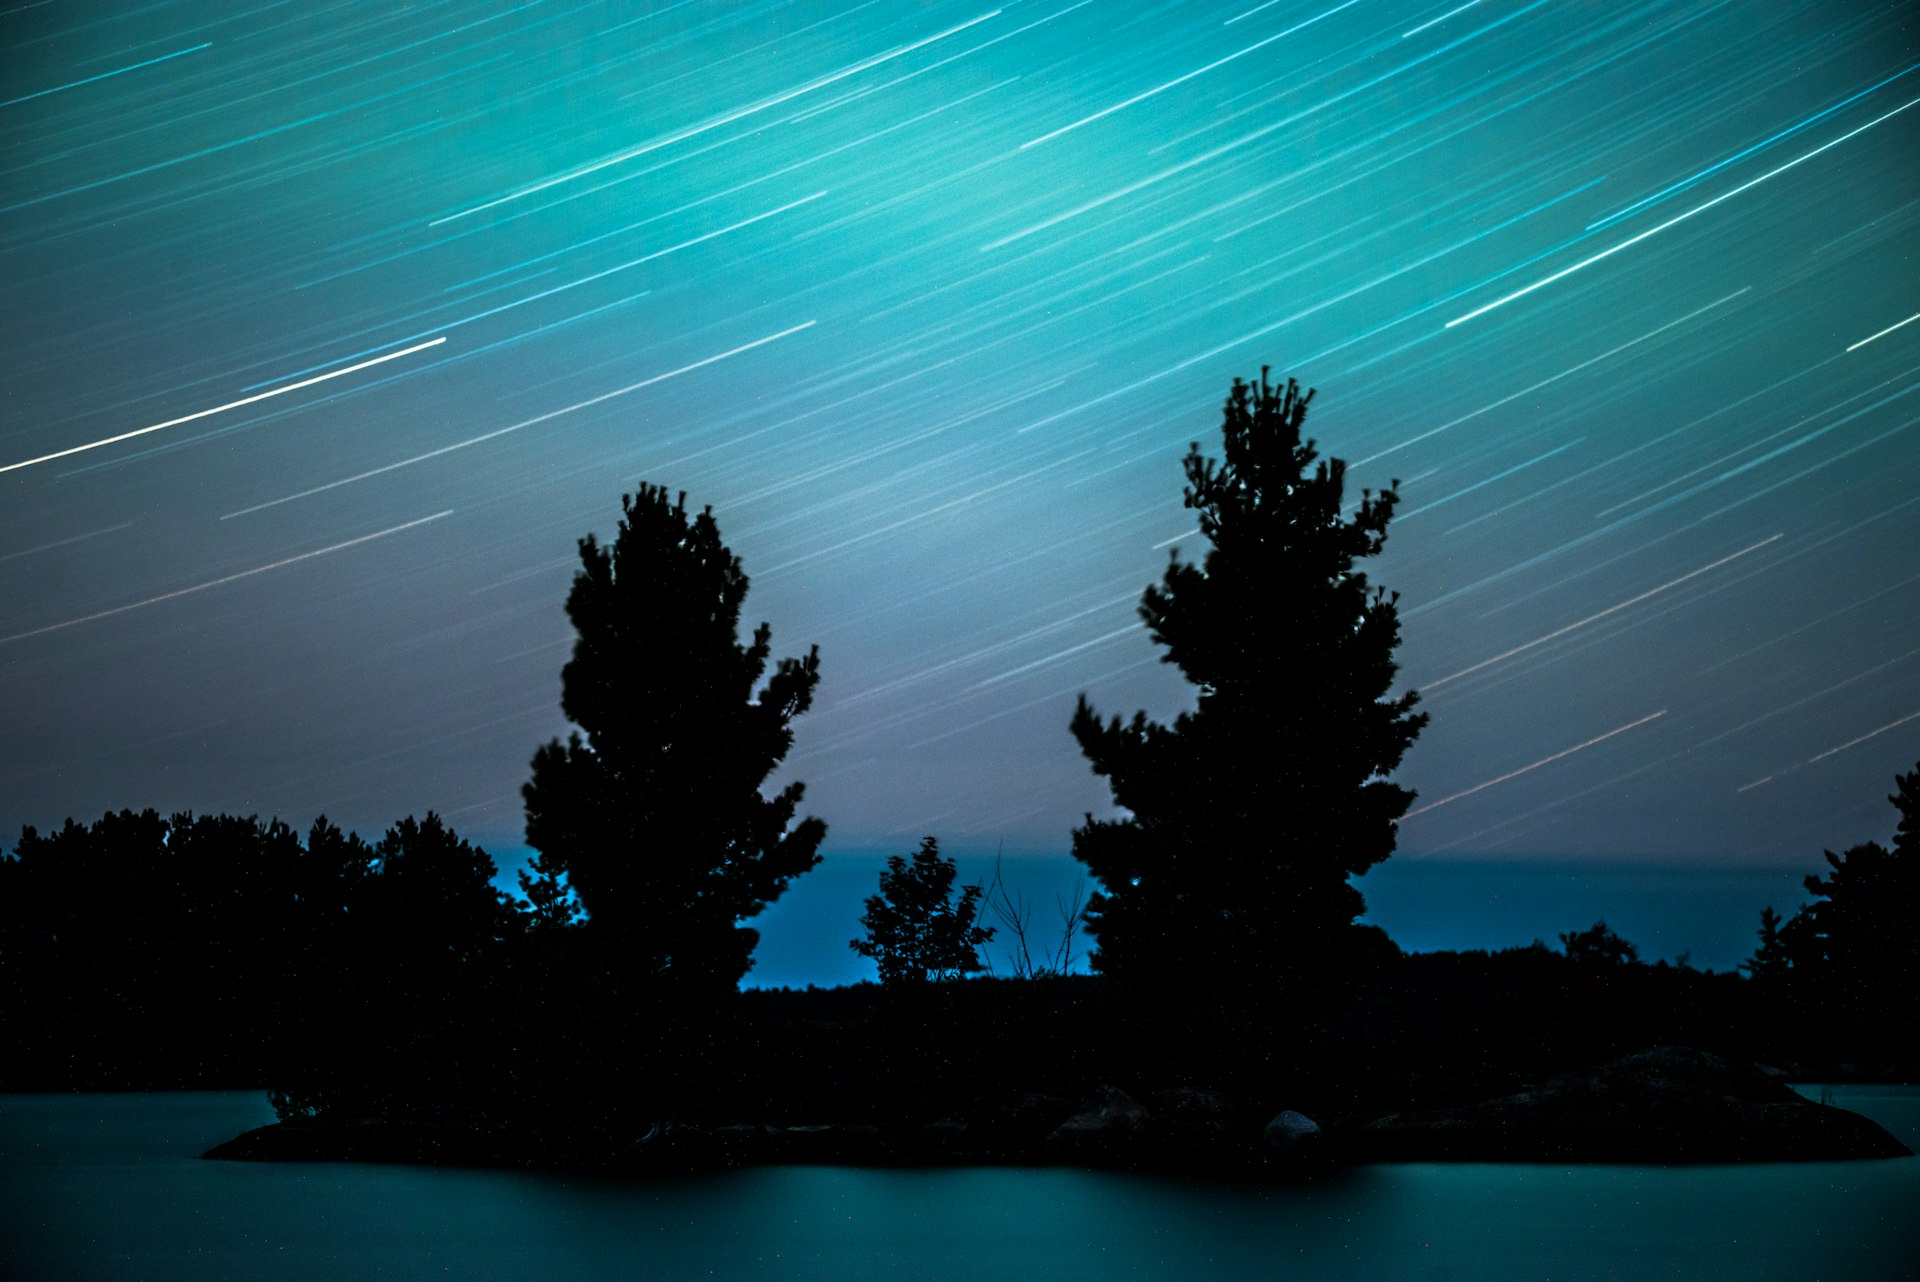 Star trails on a 20 minute exposure, with two trees in the foreground and purplish blue and green sky